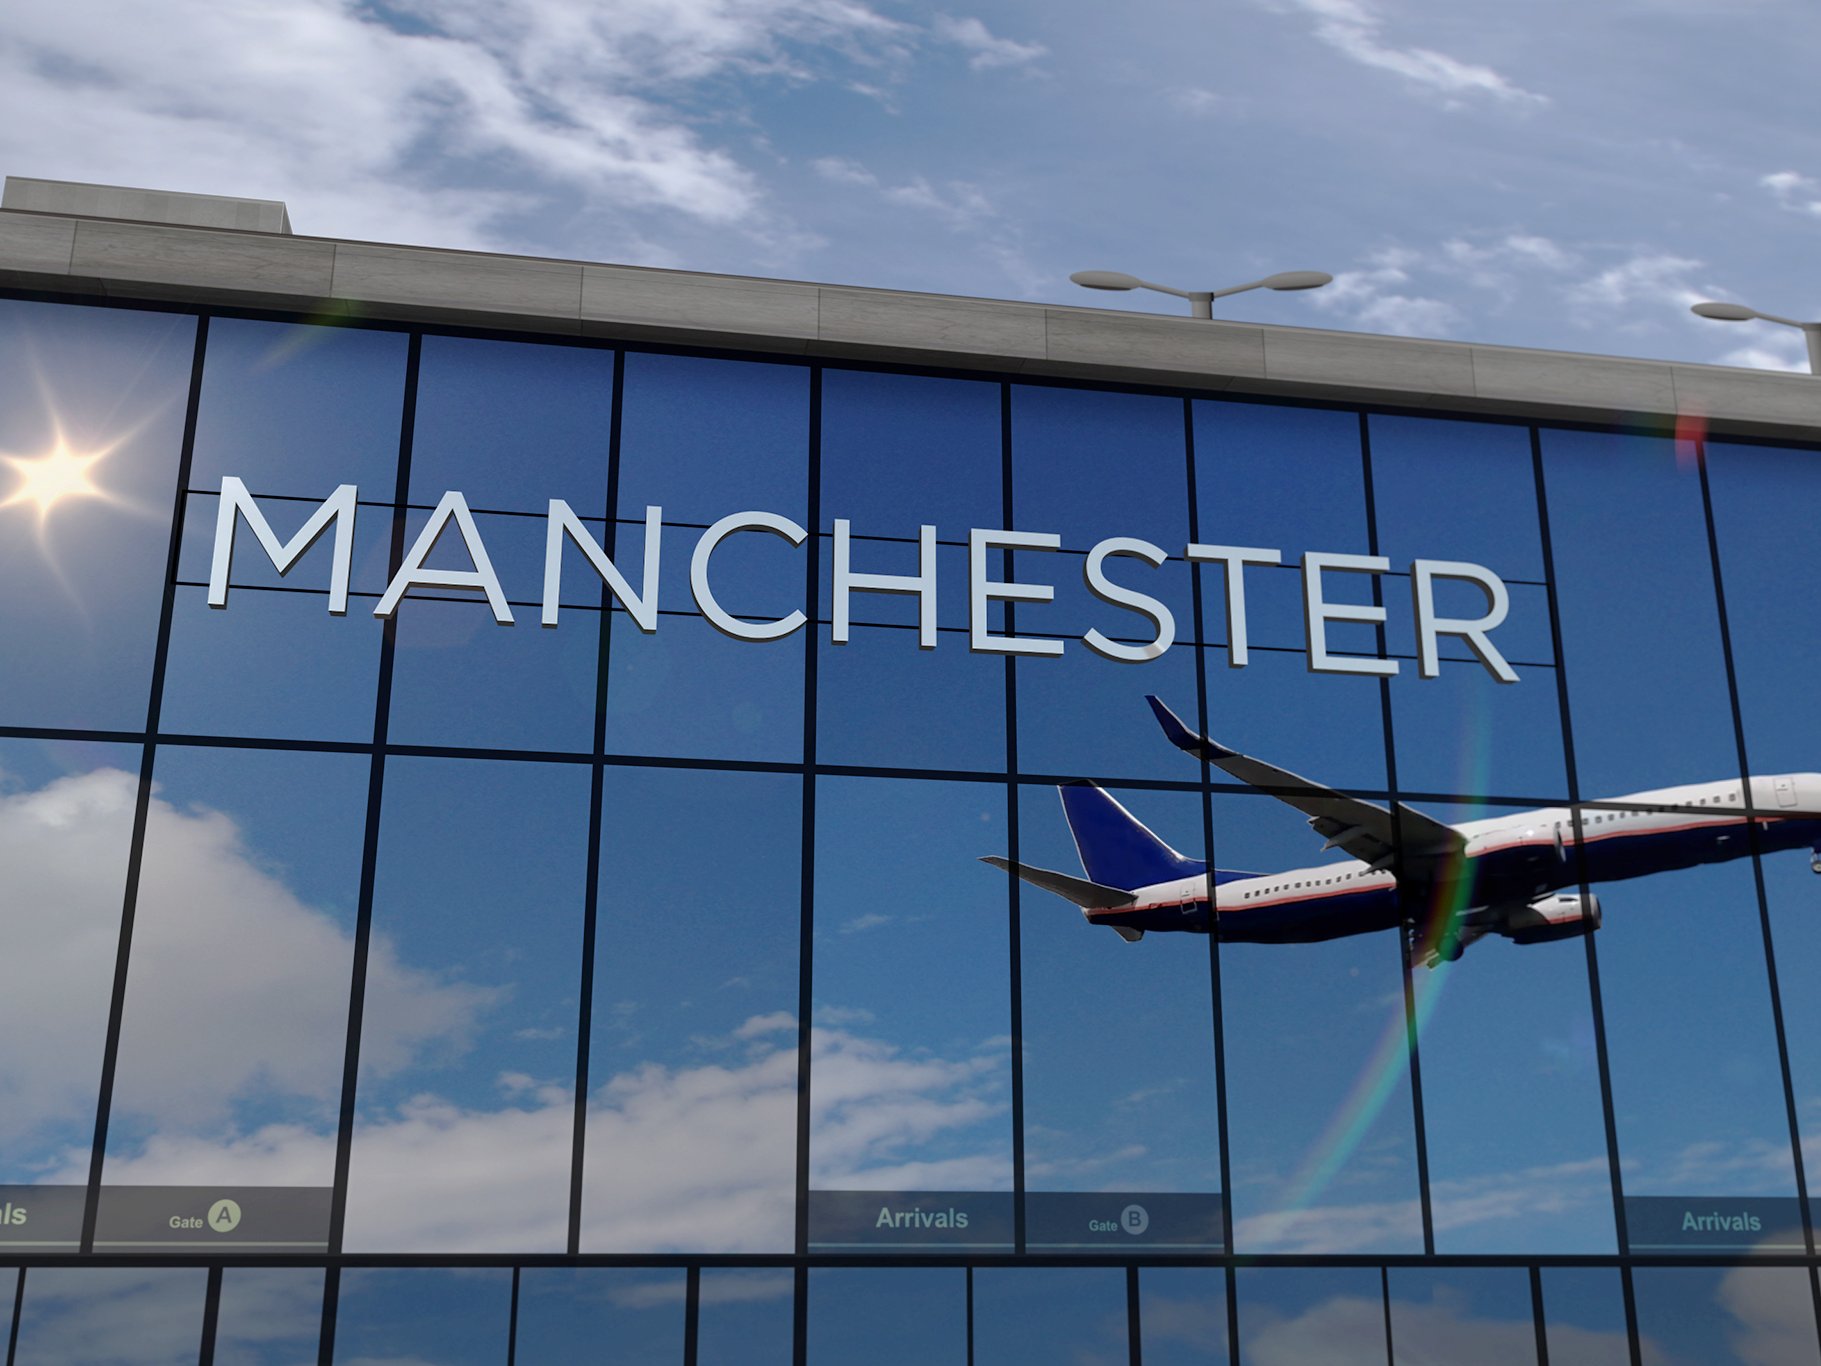 Despite the recent chaos at Manchester Airport, charges for dropping off and picking up passengers continued to be collected.